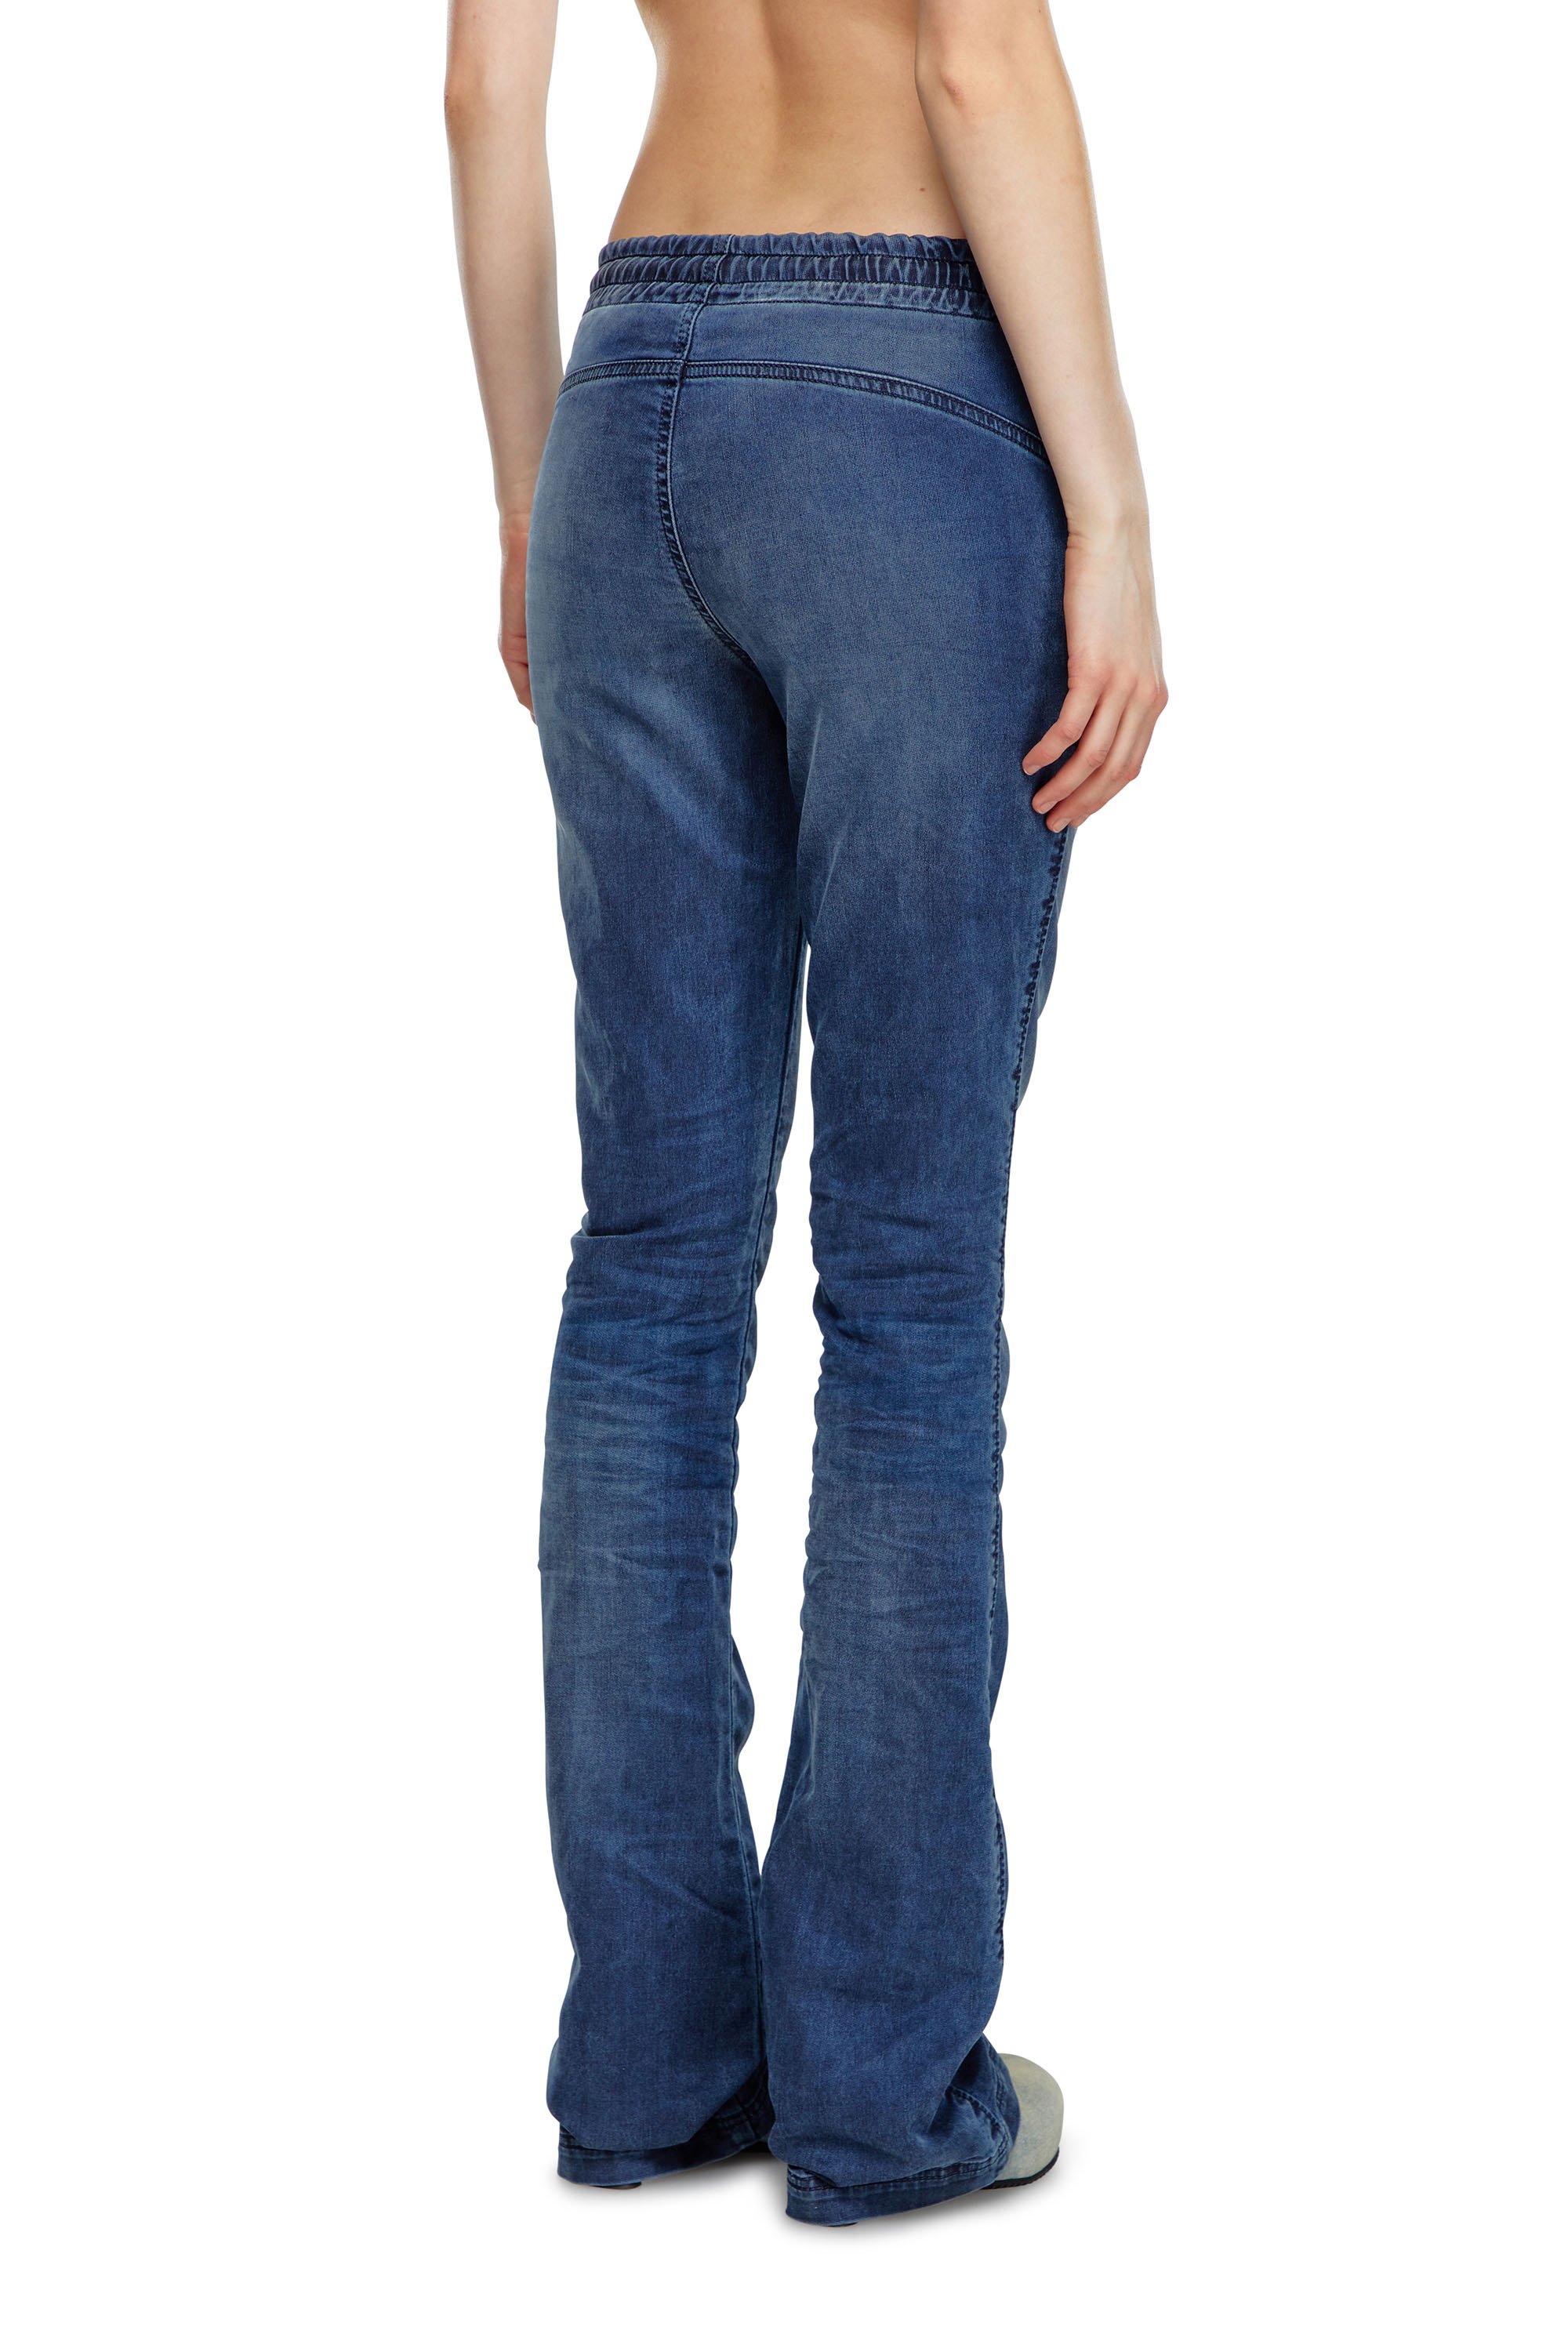 Diesel - Bootcut and Flare 2069 D-Ebbey Joggjeans® 068LX, Mujer Bootcut y Flare 2069 D-Ebbey Joggjeans® in Azul marino - Image 4